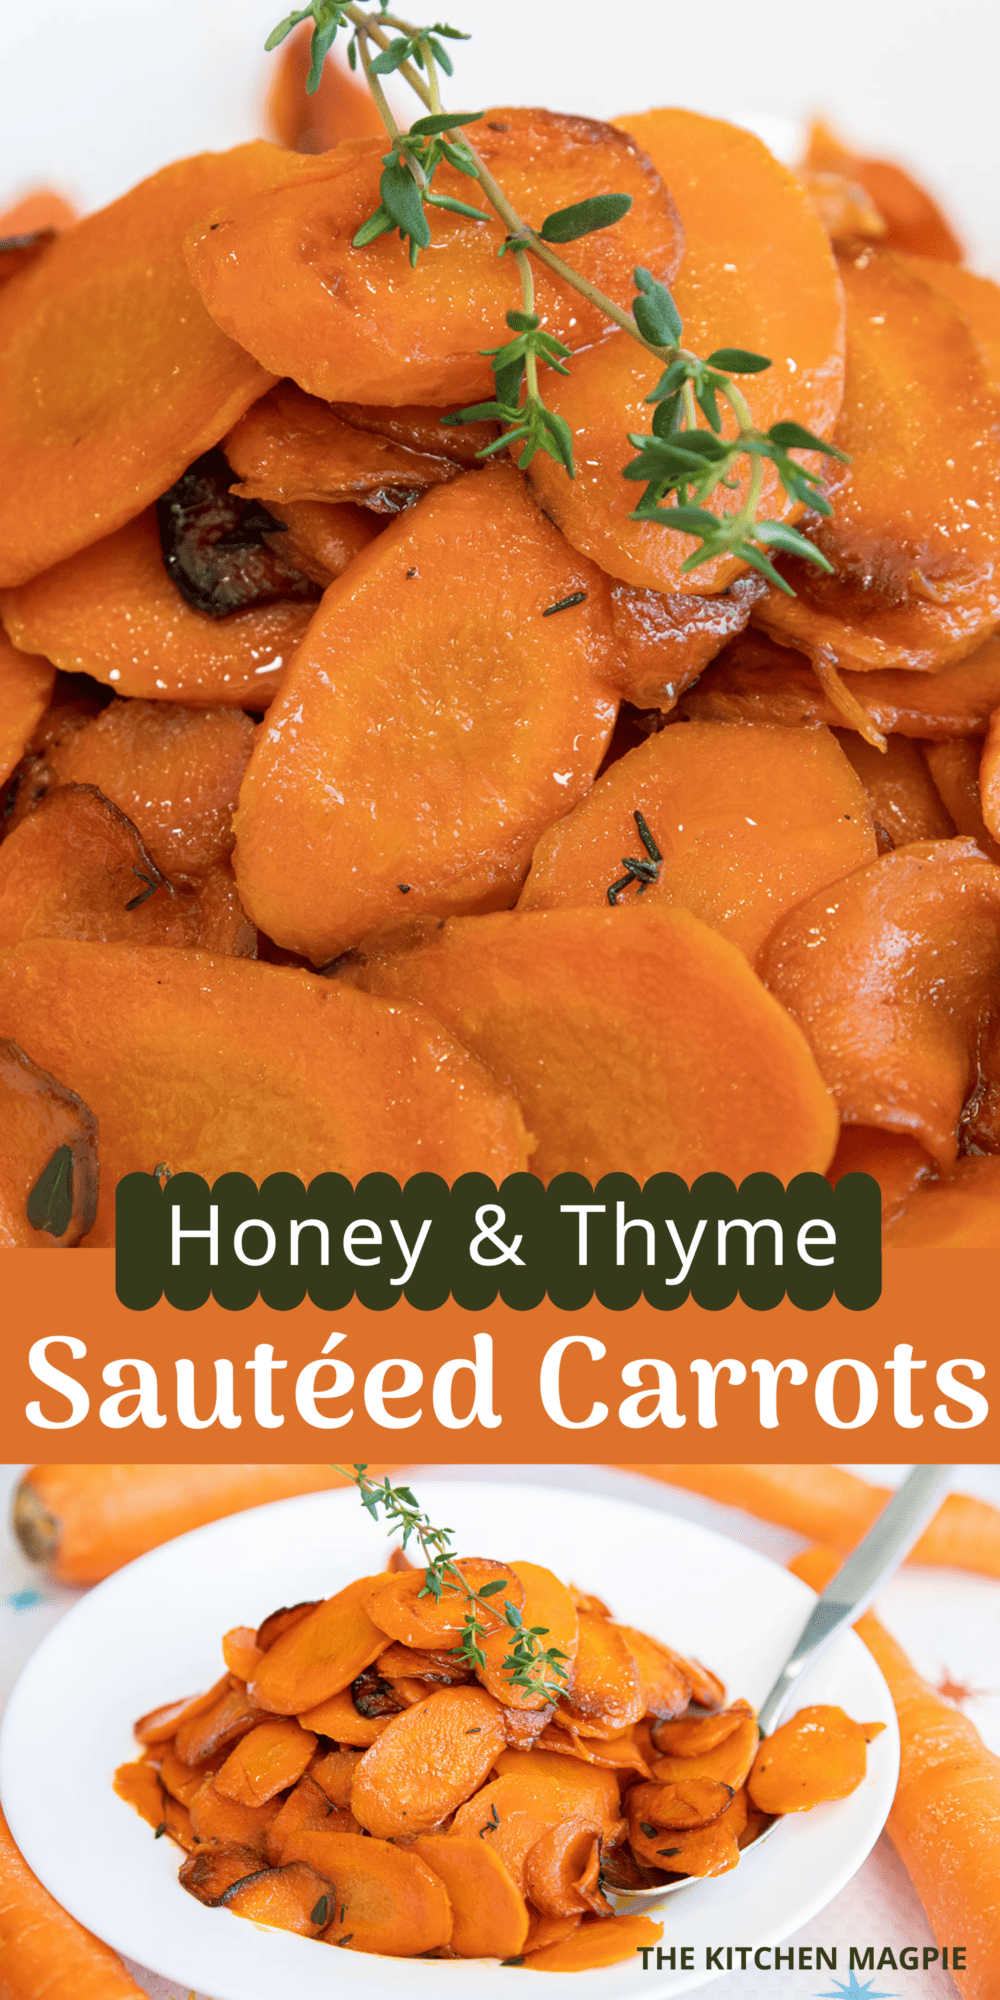 This simple method of sautéing carrots with butter, honey, and fresh thyme makes for a simple one-pan side dish that's bursting with flavor.